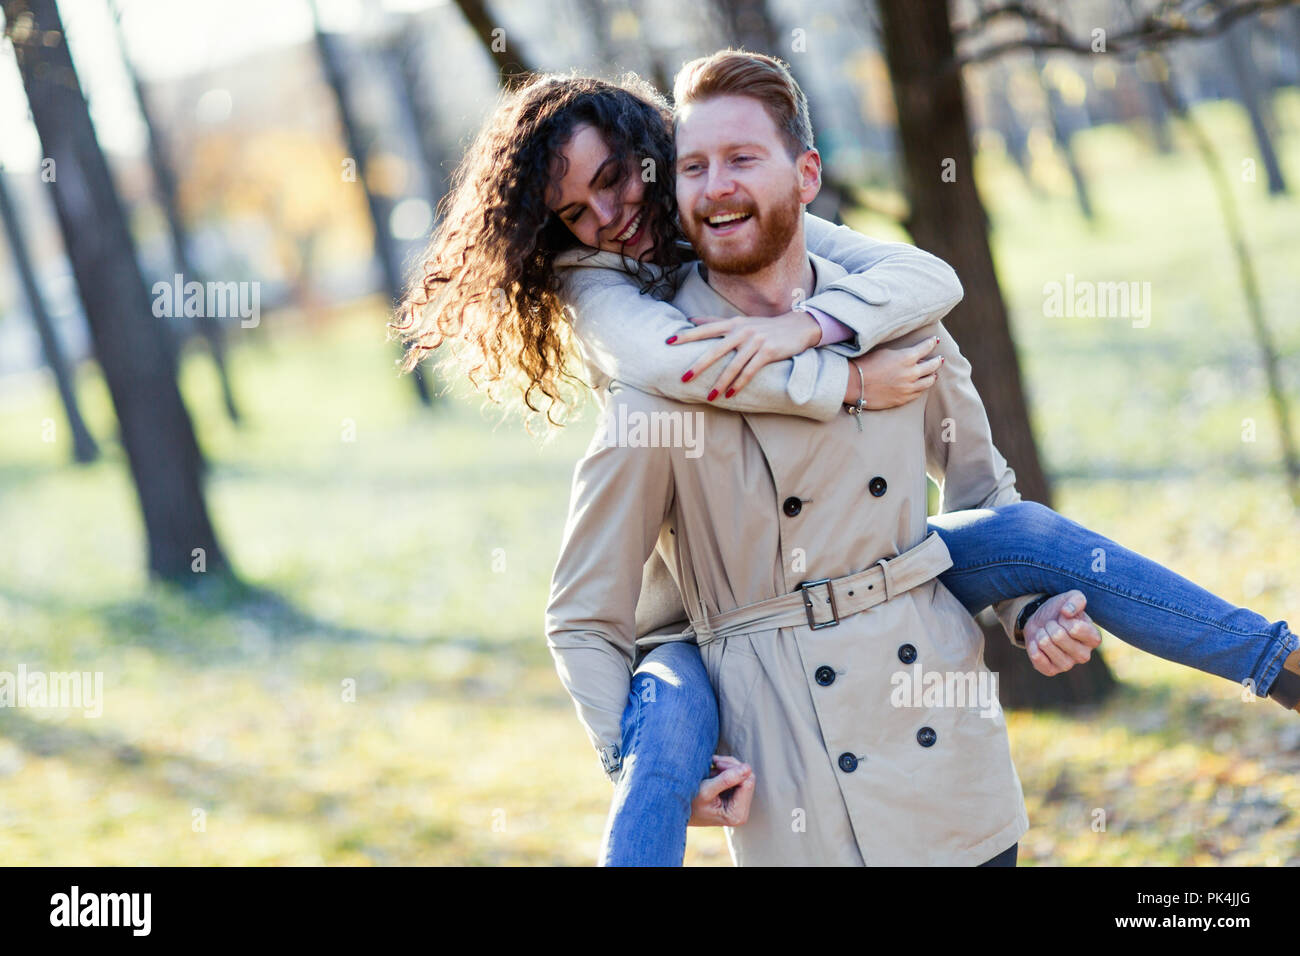 Cheerful young couple having fun on date Stock Photo